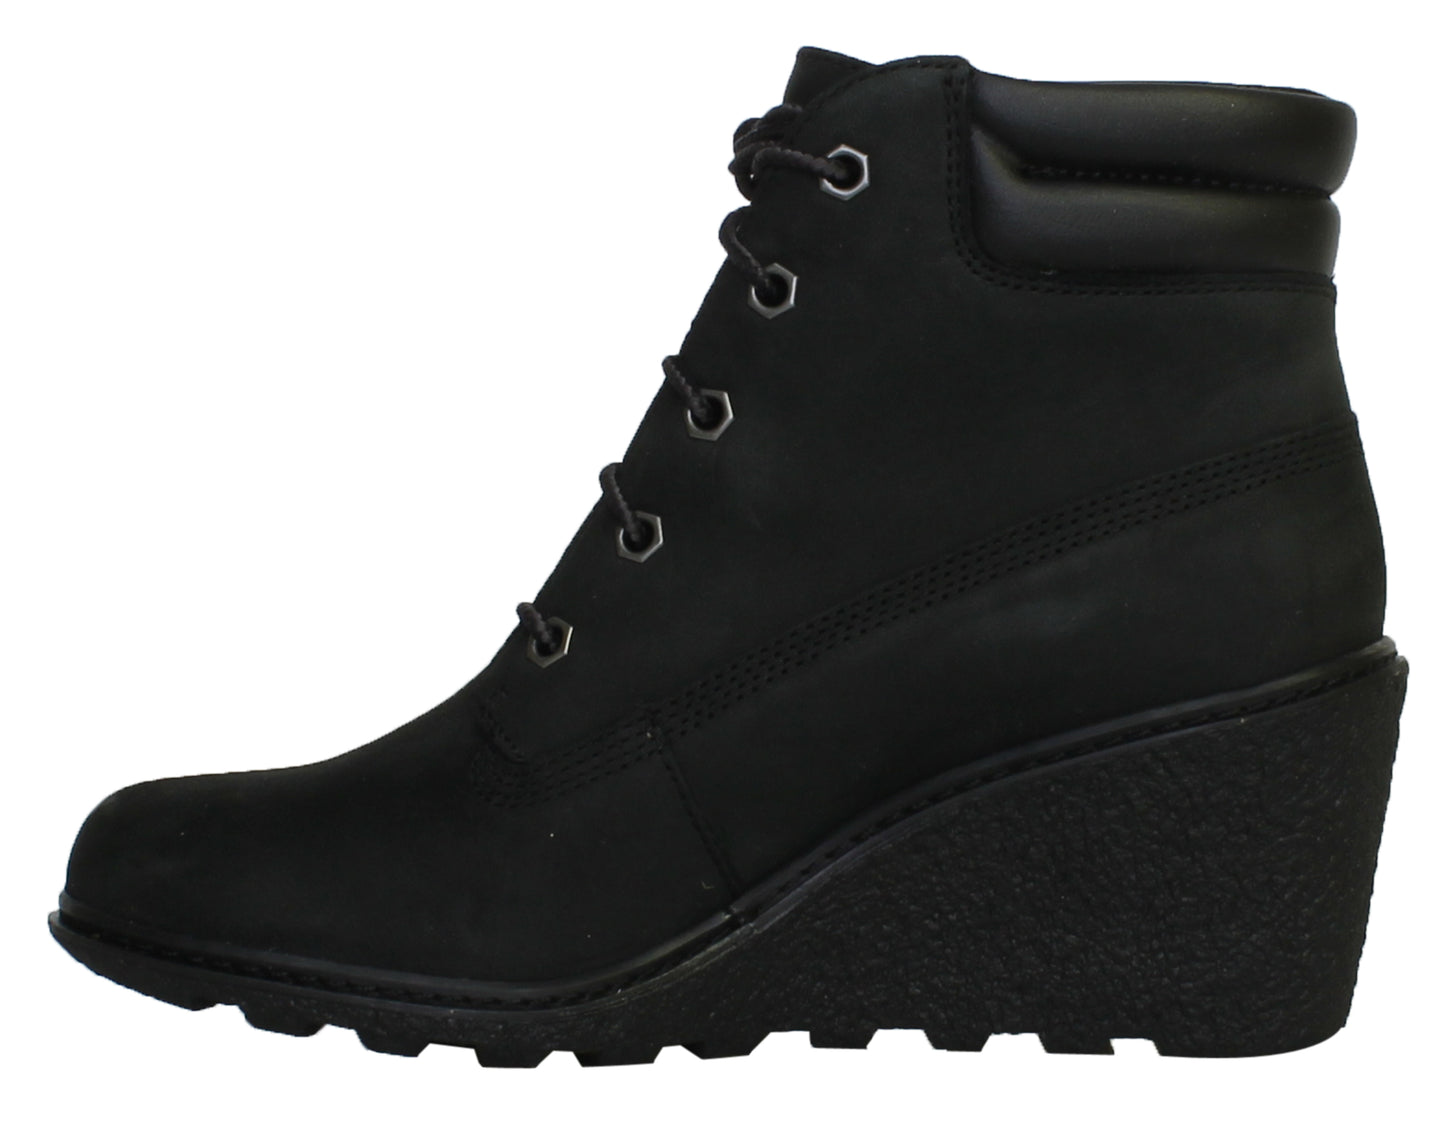 Timberland Earthkeepers Amston 6-Inch Women's Wedge Boots